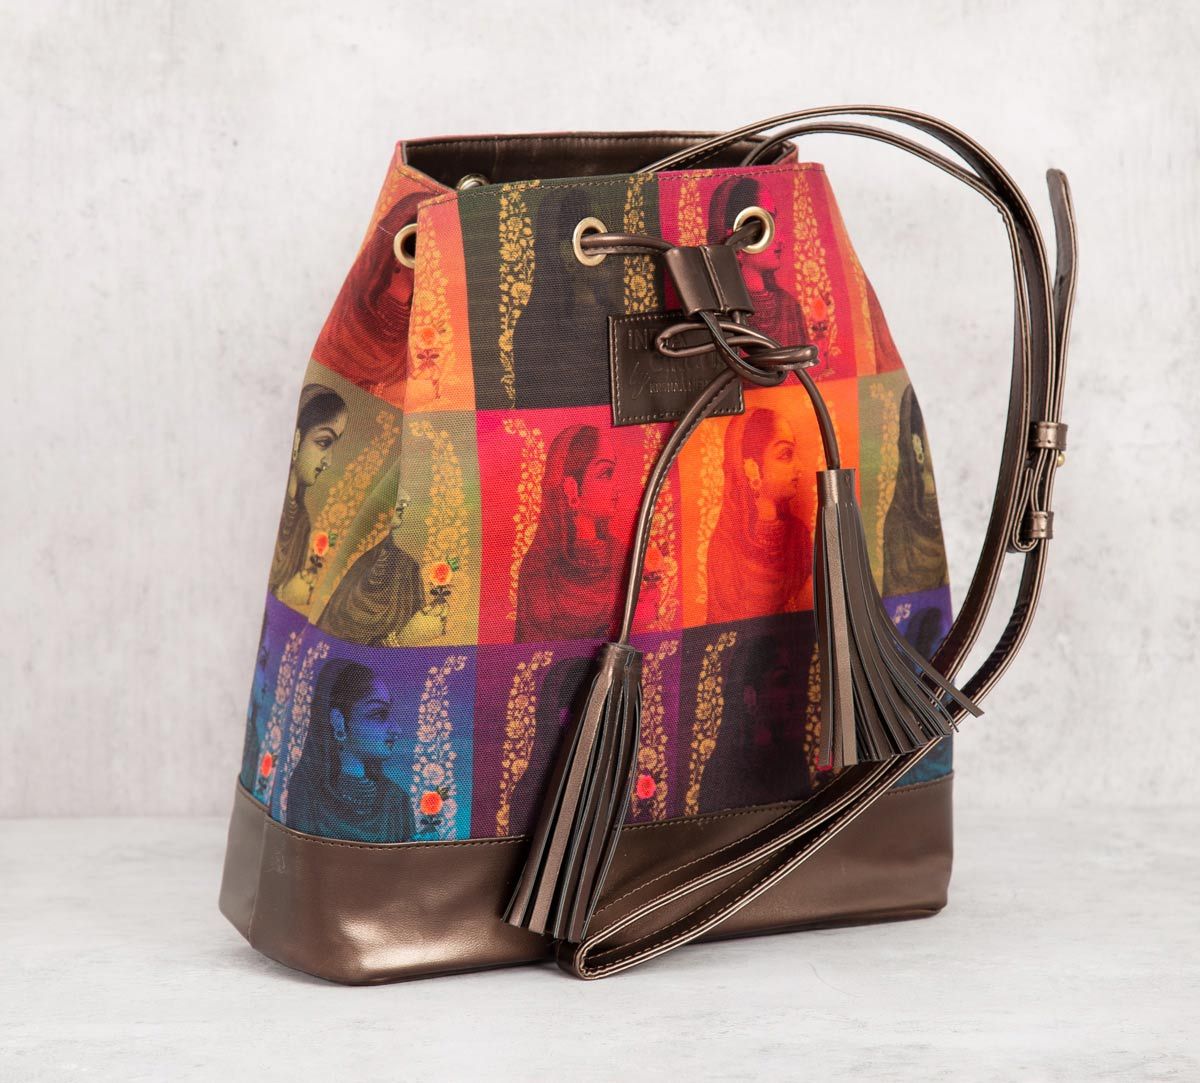 Shop for Latest Range of Hobo Bags online | India Circus